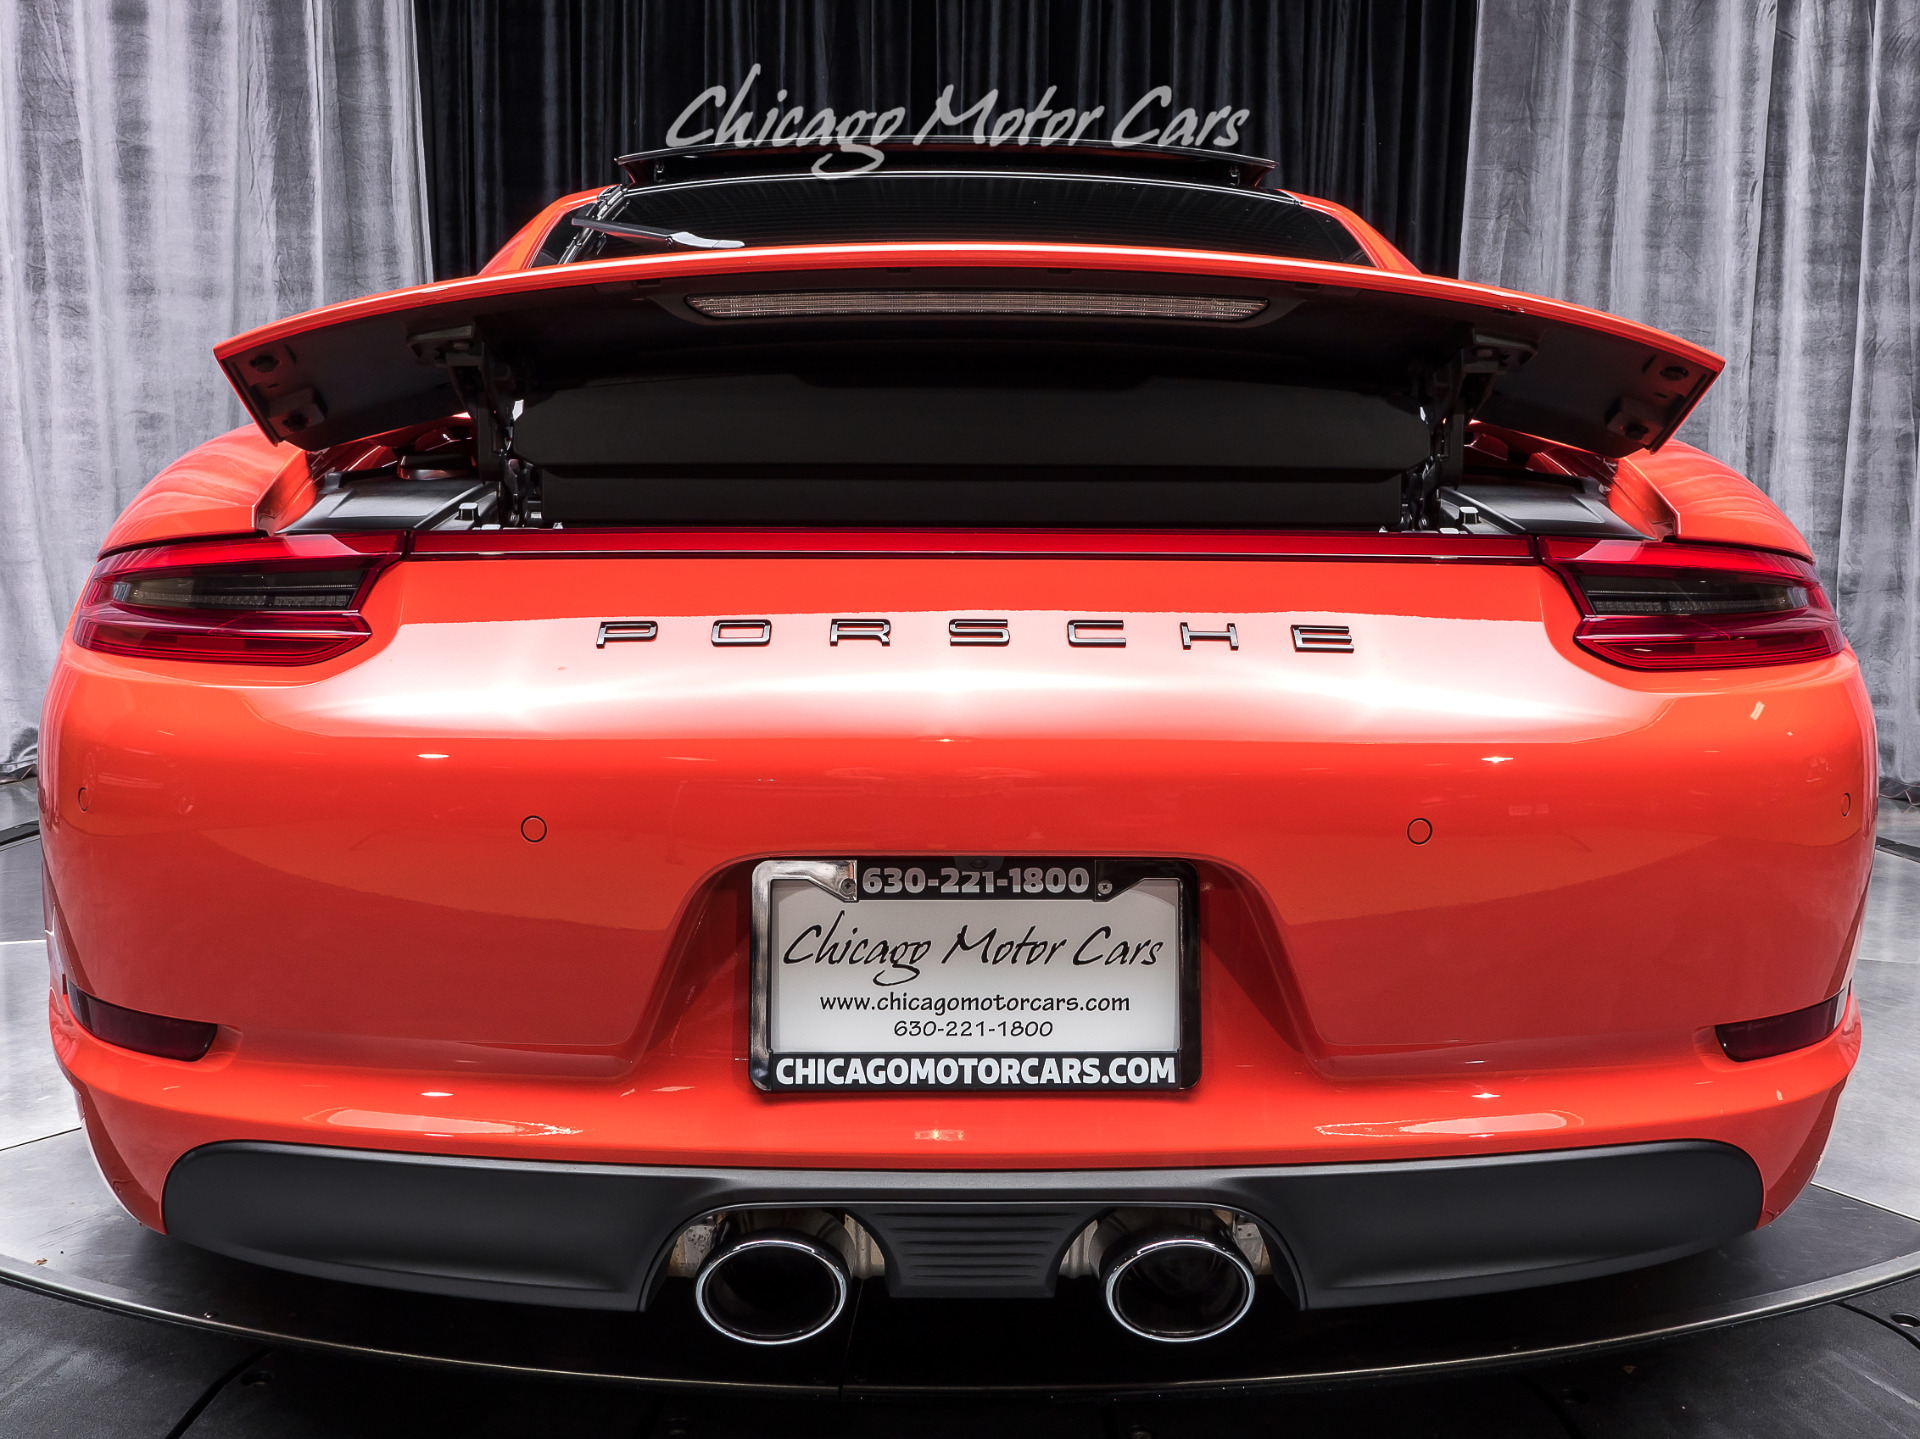 Used-2017-Porsche-911-Carrera-4S-Coupe-MSRP-137450